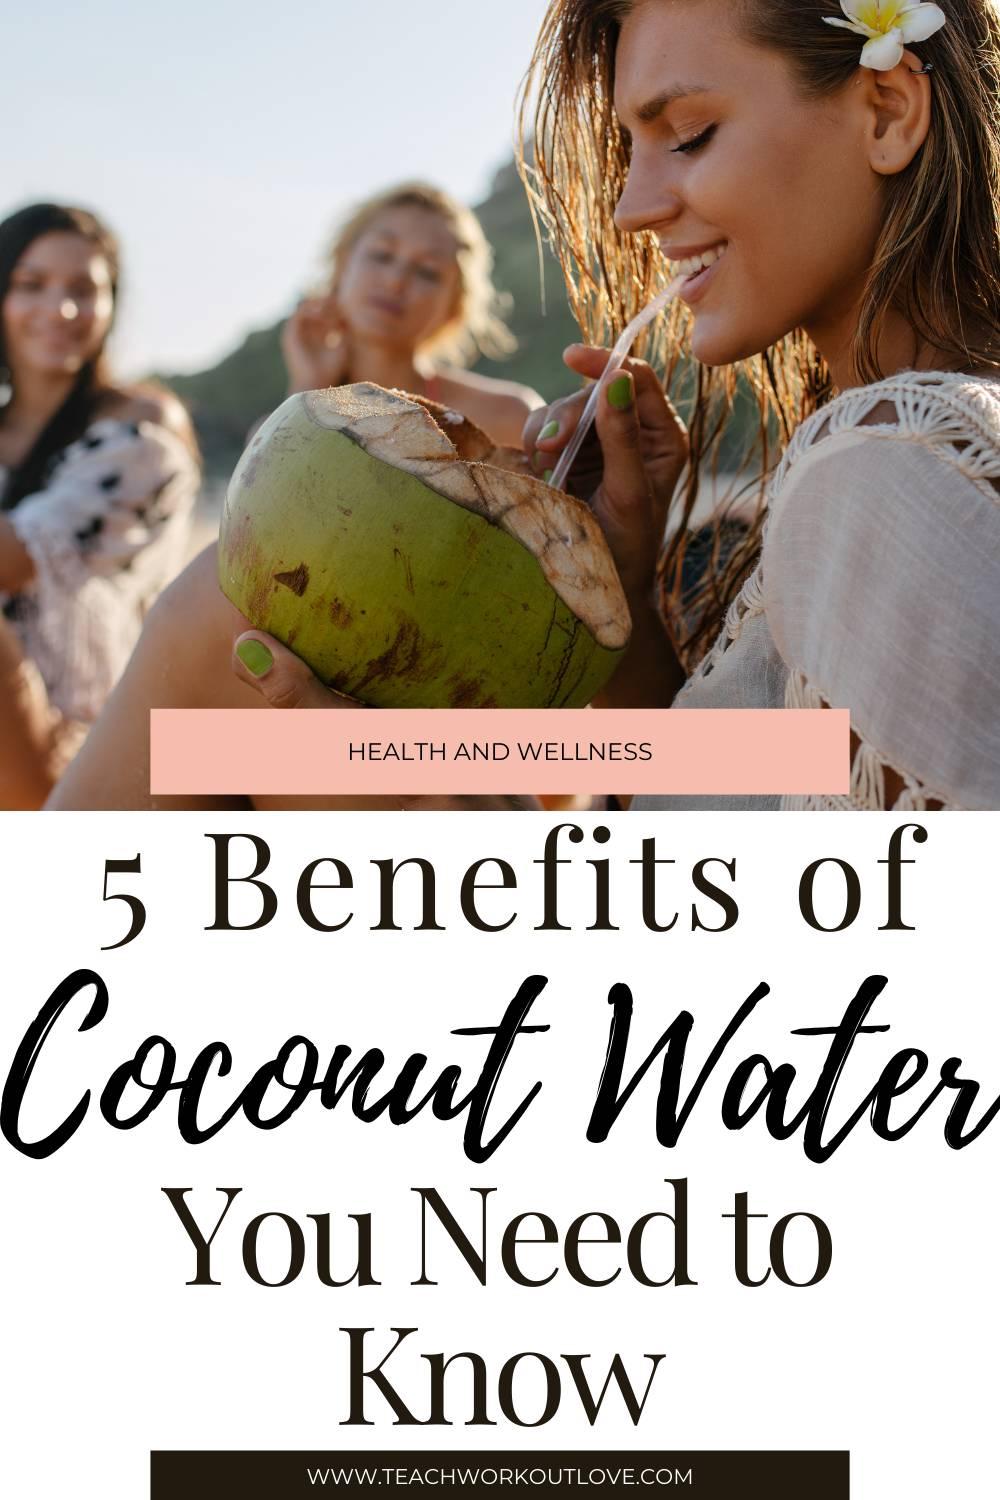 Lately, coconut water has been trending in the health and wellness space. Here are the top 5 coconut water benefits.